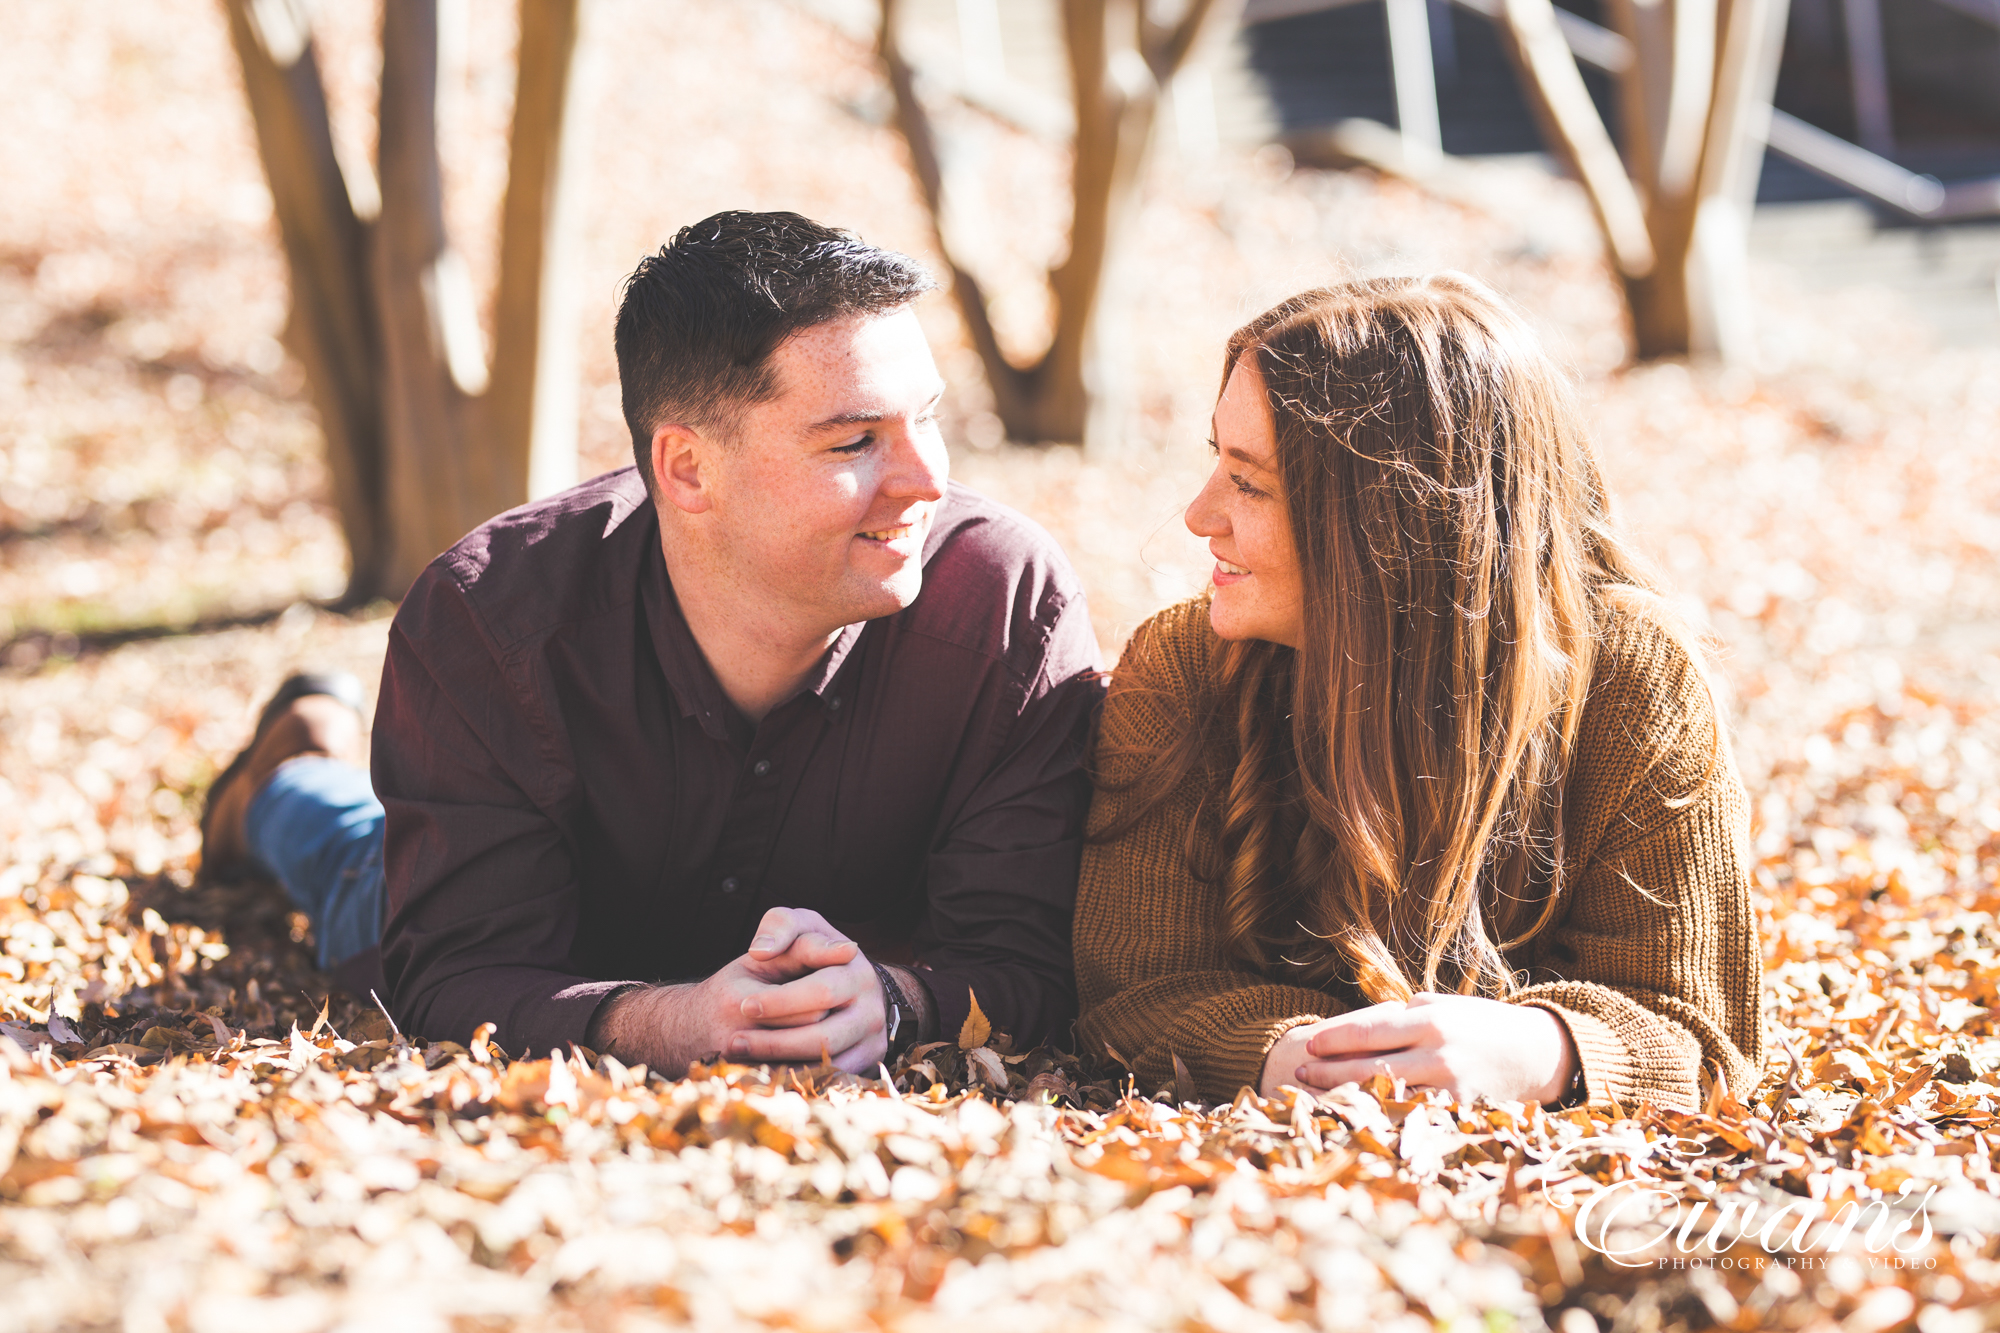 Epping Forest Engagement Photos - Hannah Larkin Photography